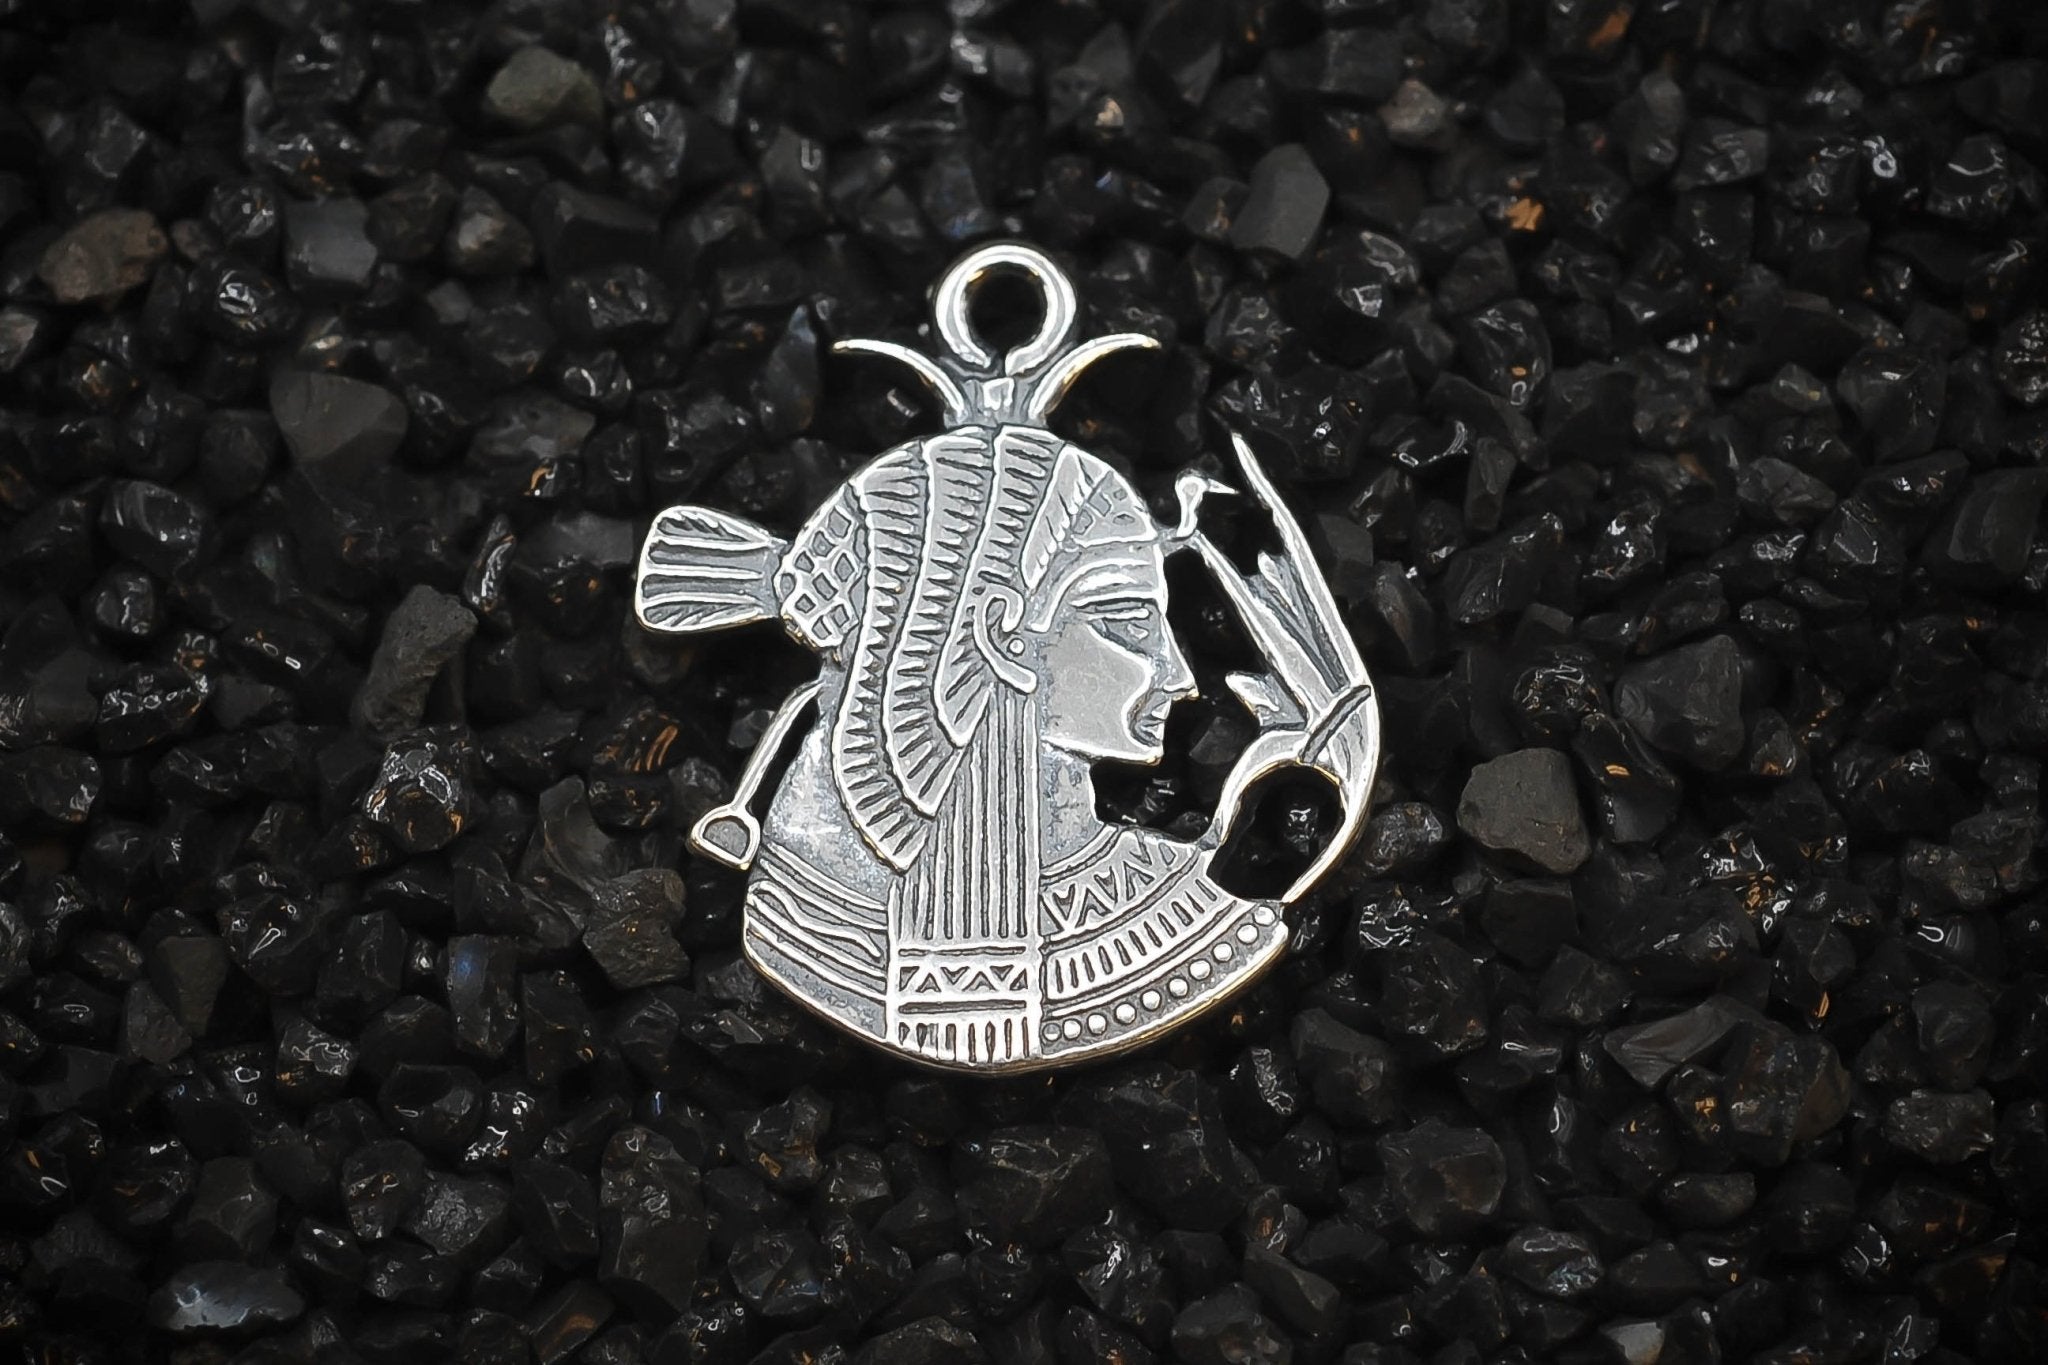 Cleopatra Queen of Ancient Egypt Side Profile Charm | 925 Sterling Silver, Oxidized | Jewelry Making Pendant - HarperCrown